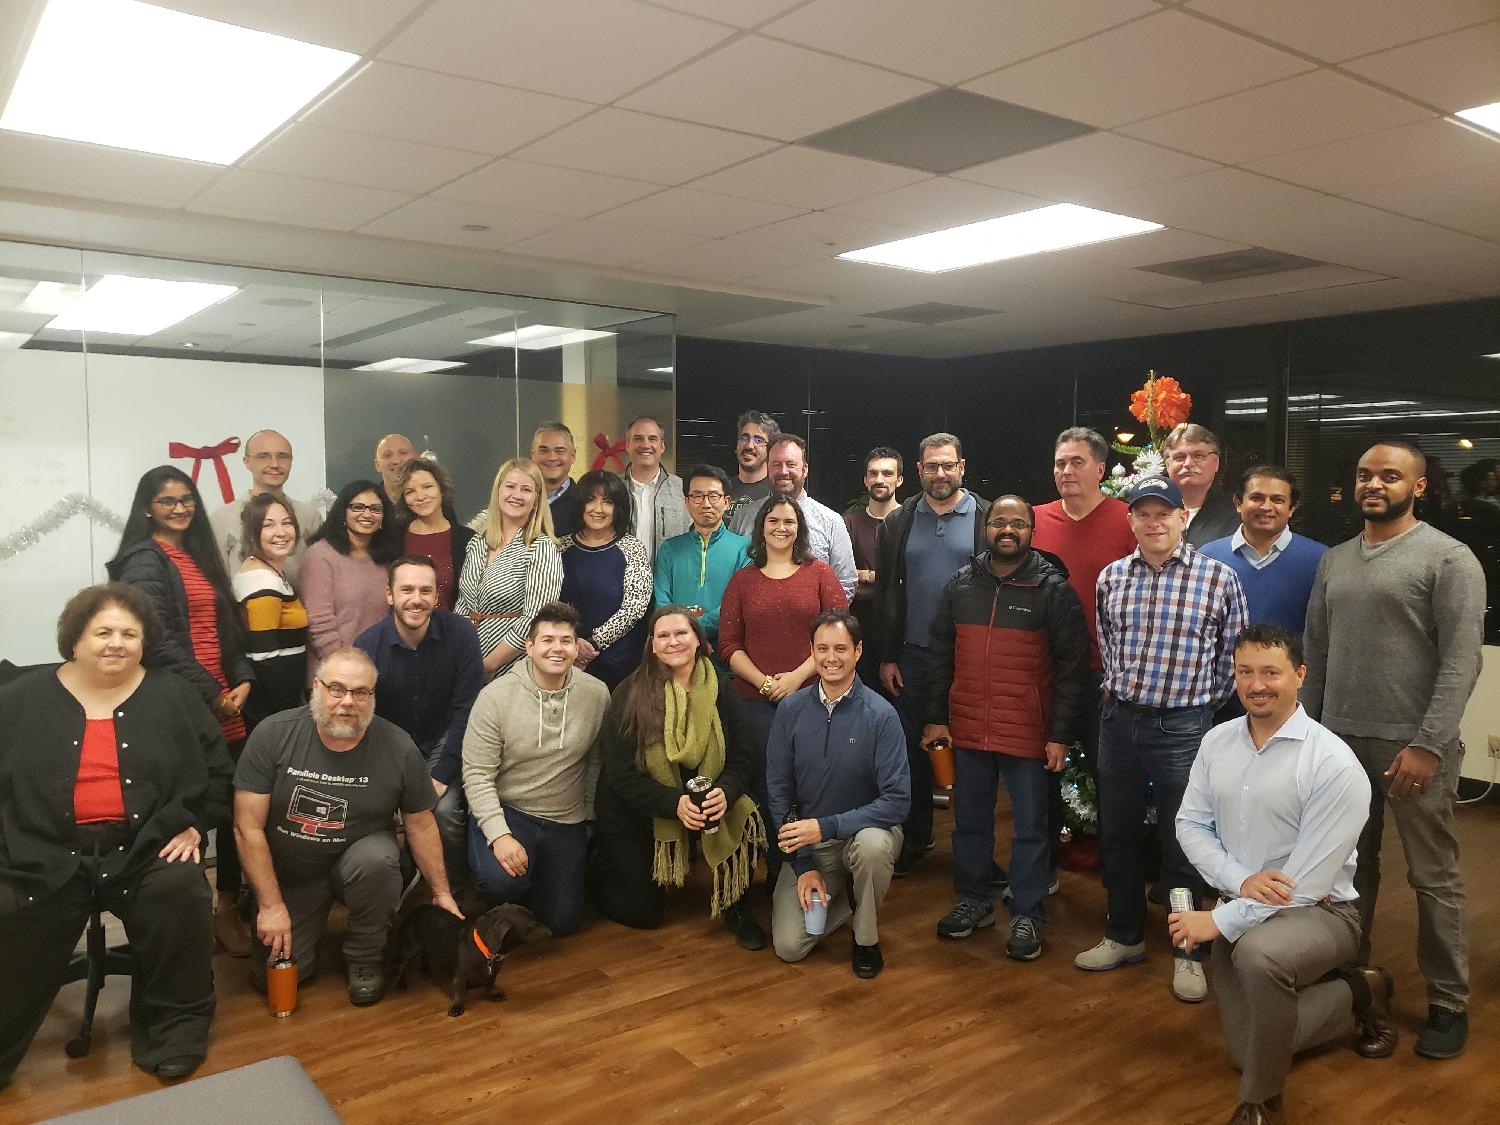 Our US team poses at our annual Virtuosity holiday party.